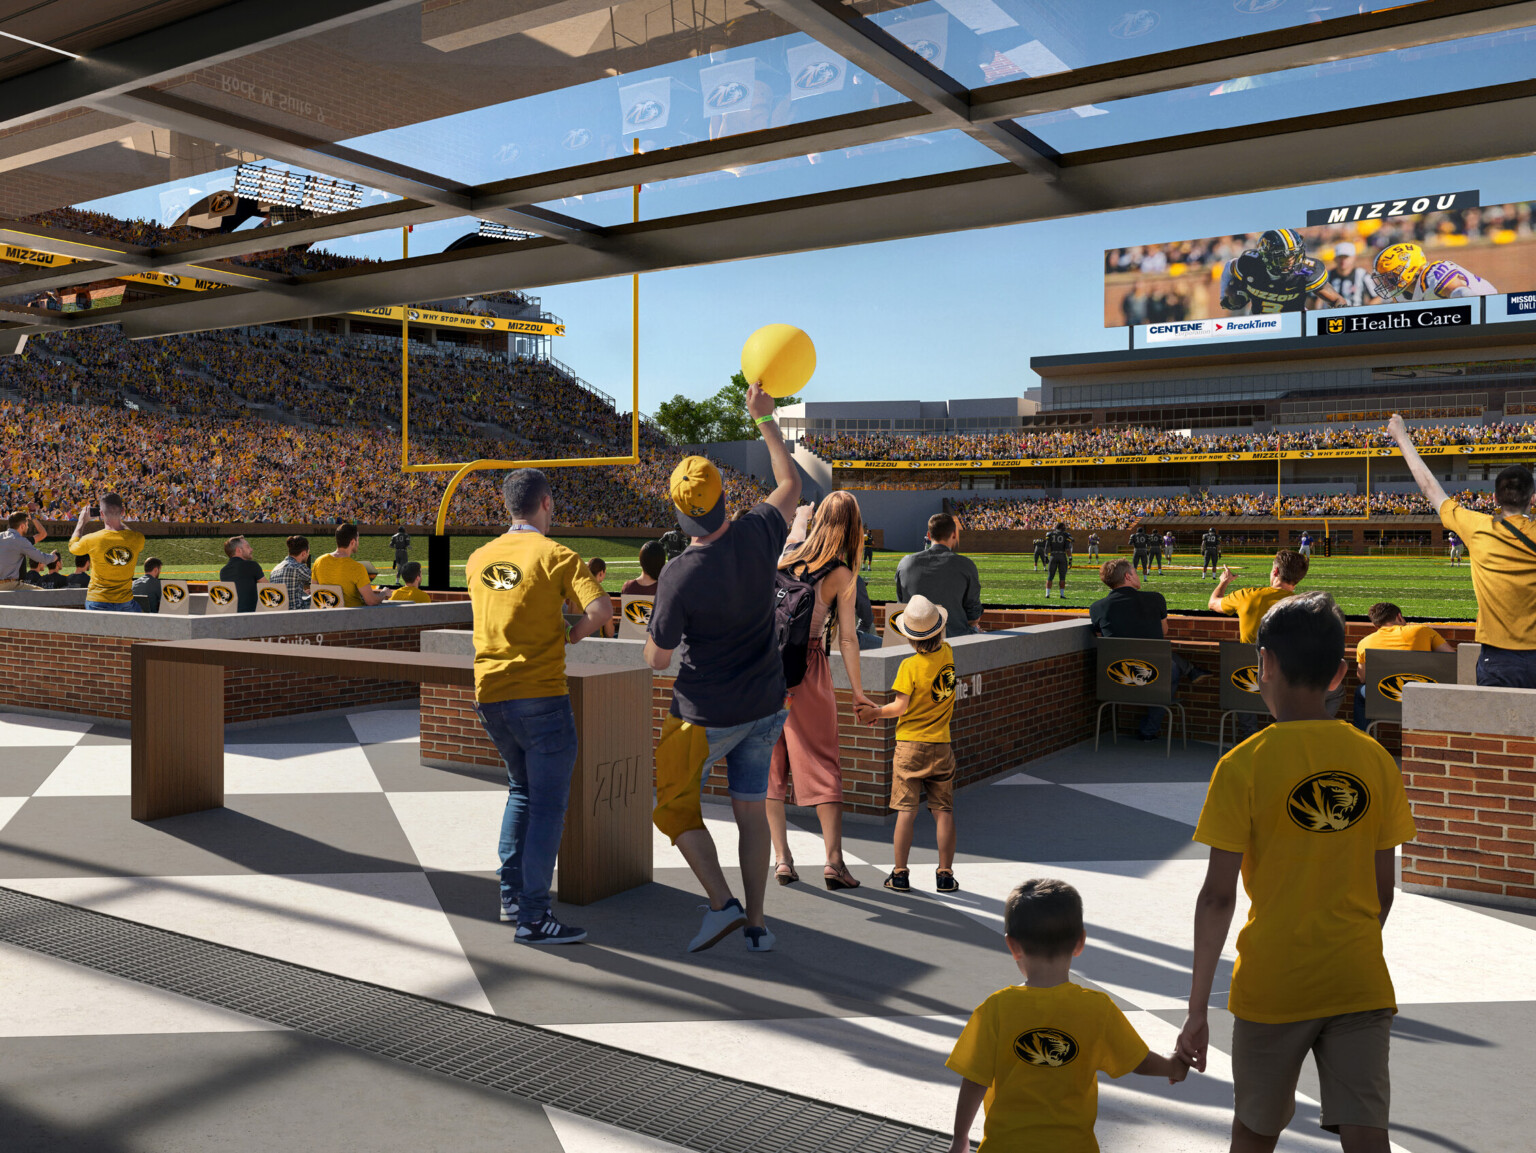 Seating and community space behind goal post of renovated football stadium fans engage with game